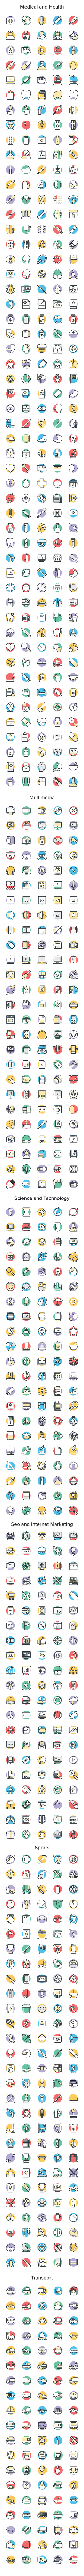 2900+ Cool Vector Icon Sets Bundle in Communication Icons - product preview 4